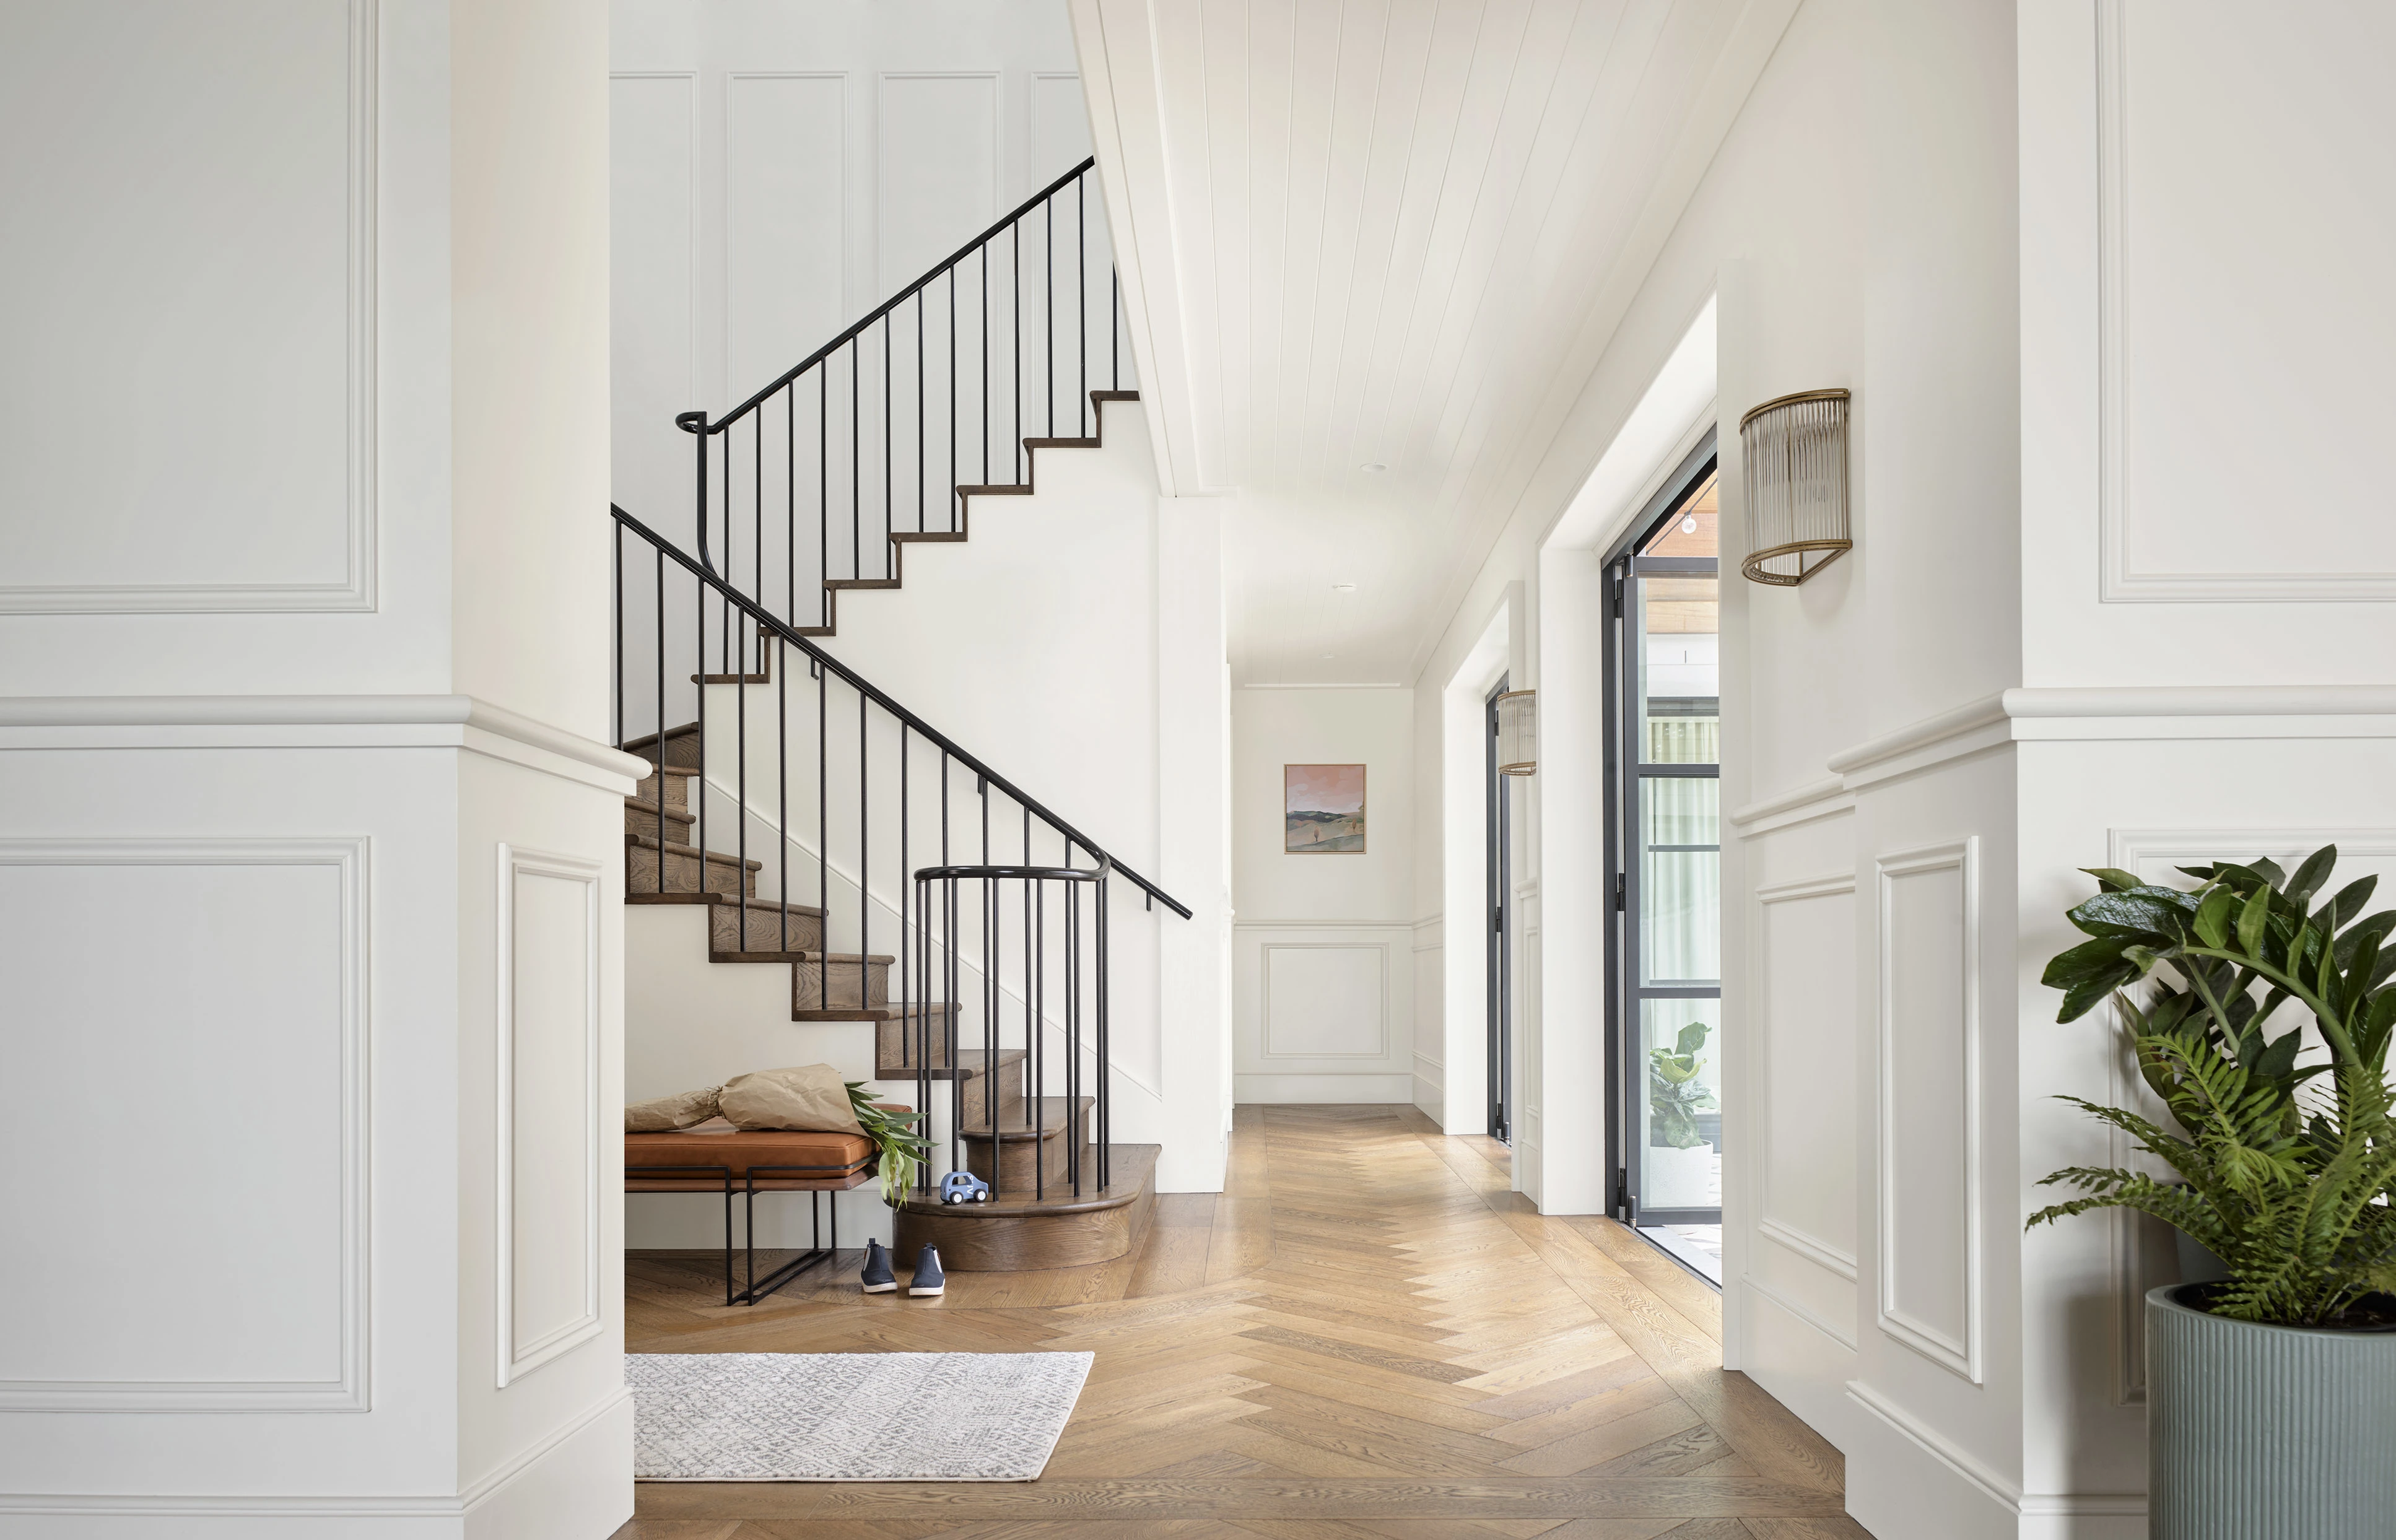 Entry way with stairs and wooden floors. The walls are white.